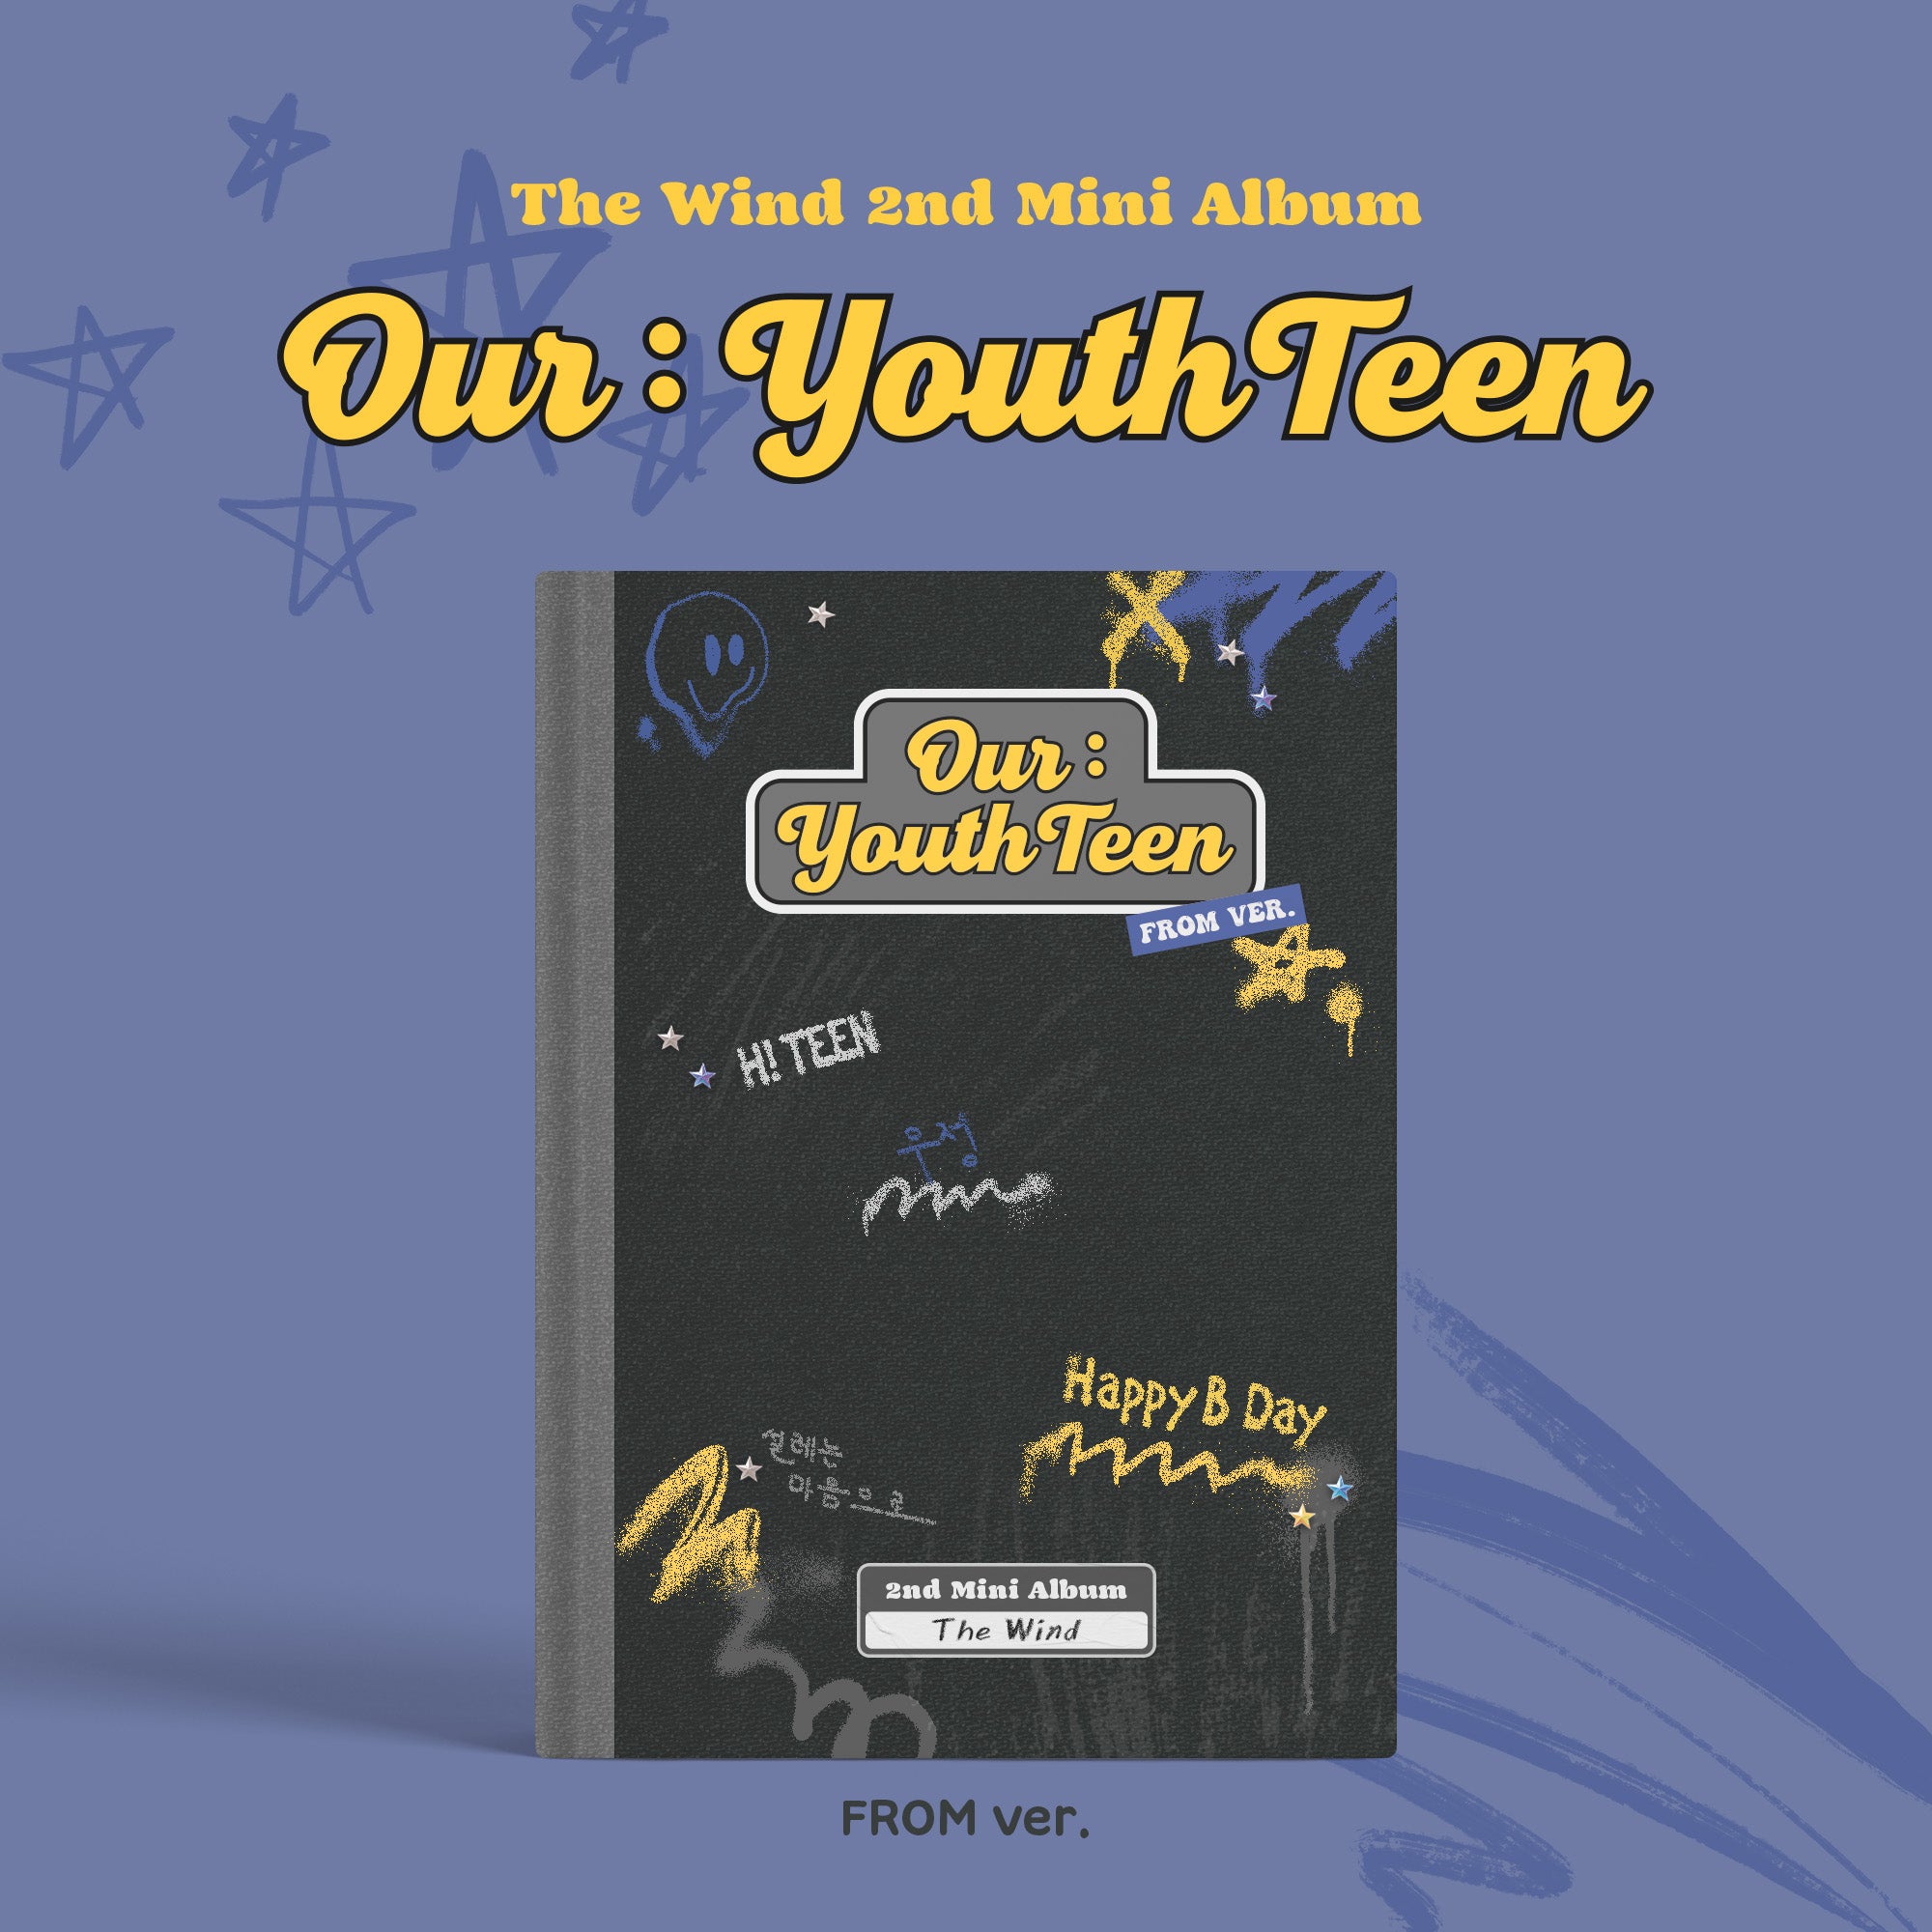 The Wind - 2nd Mini Album Our : YouthTeen